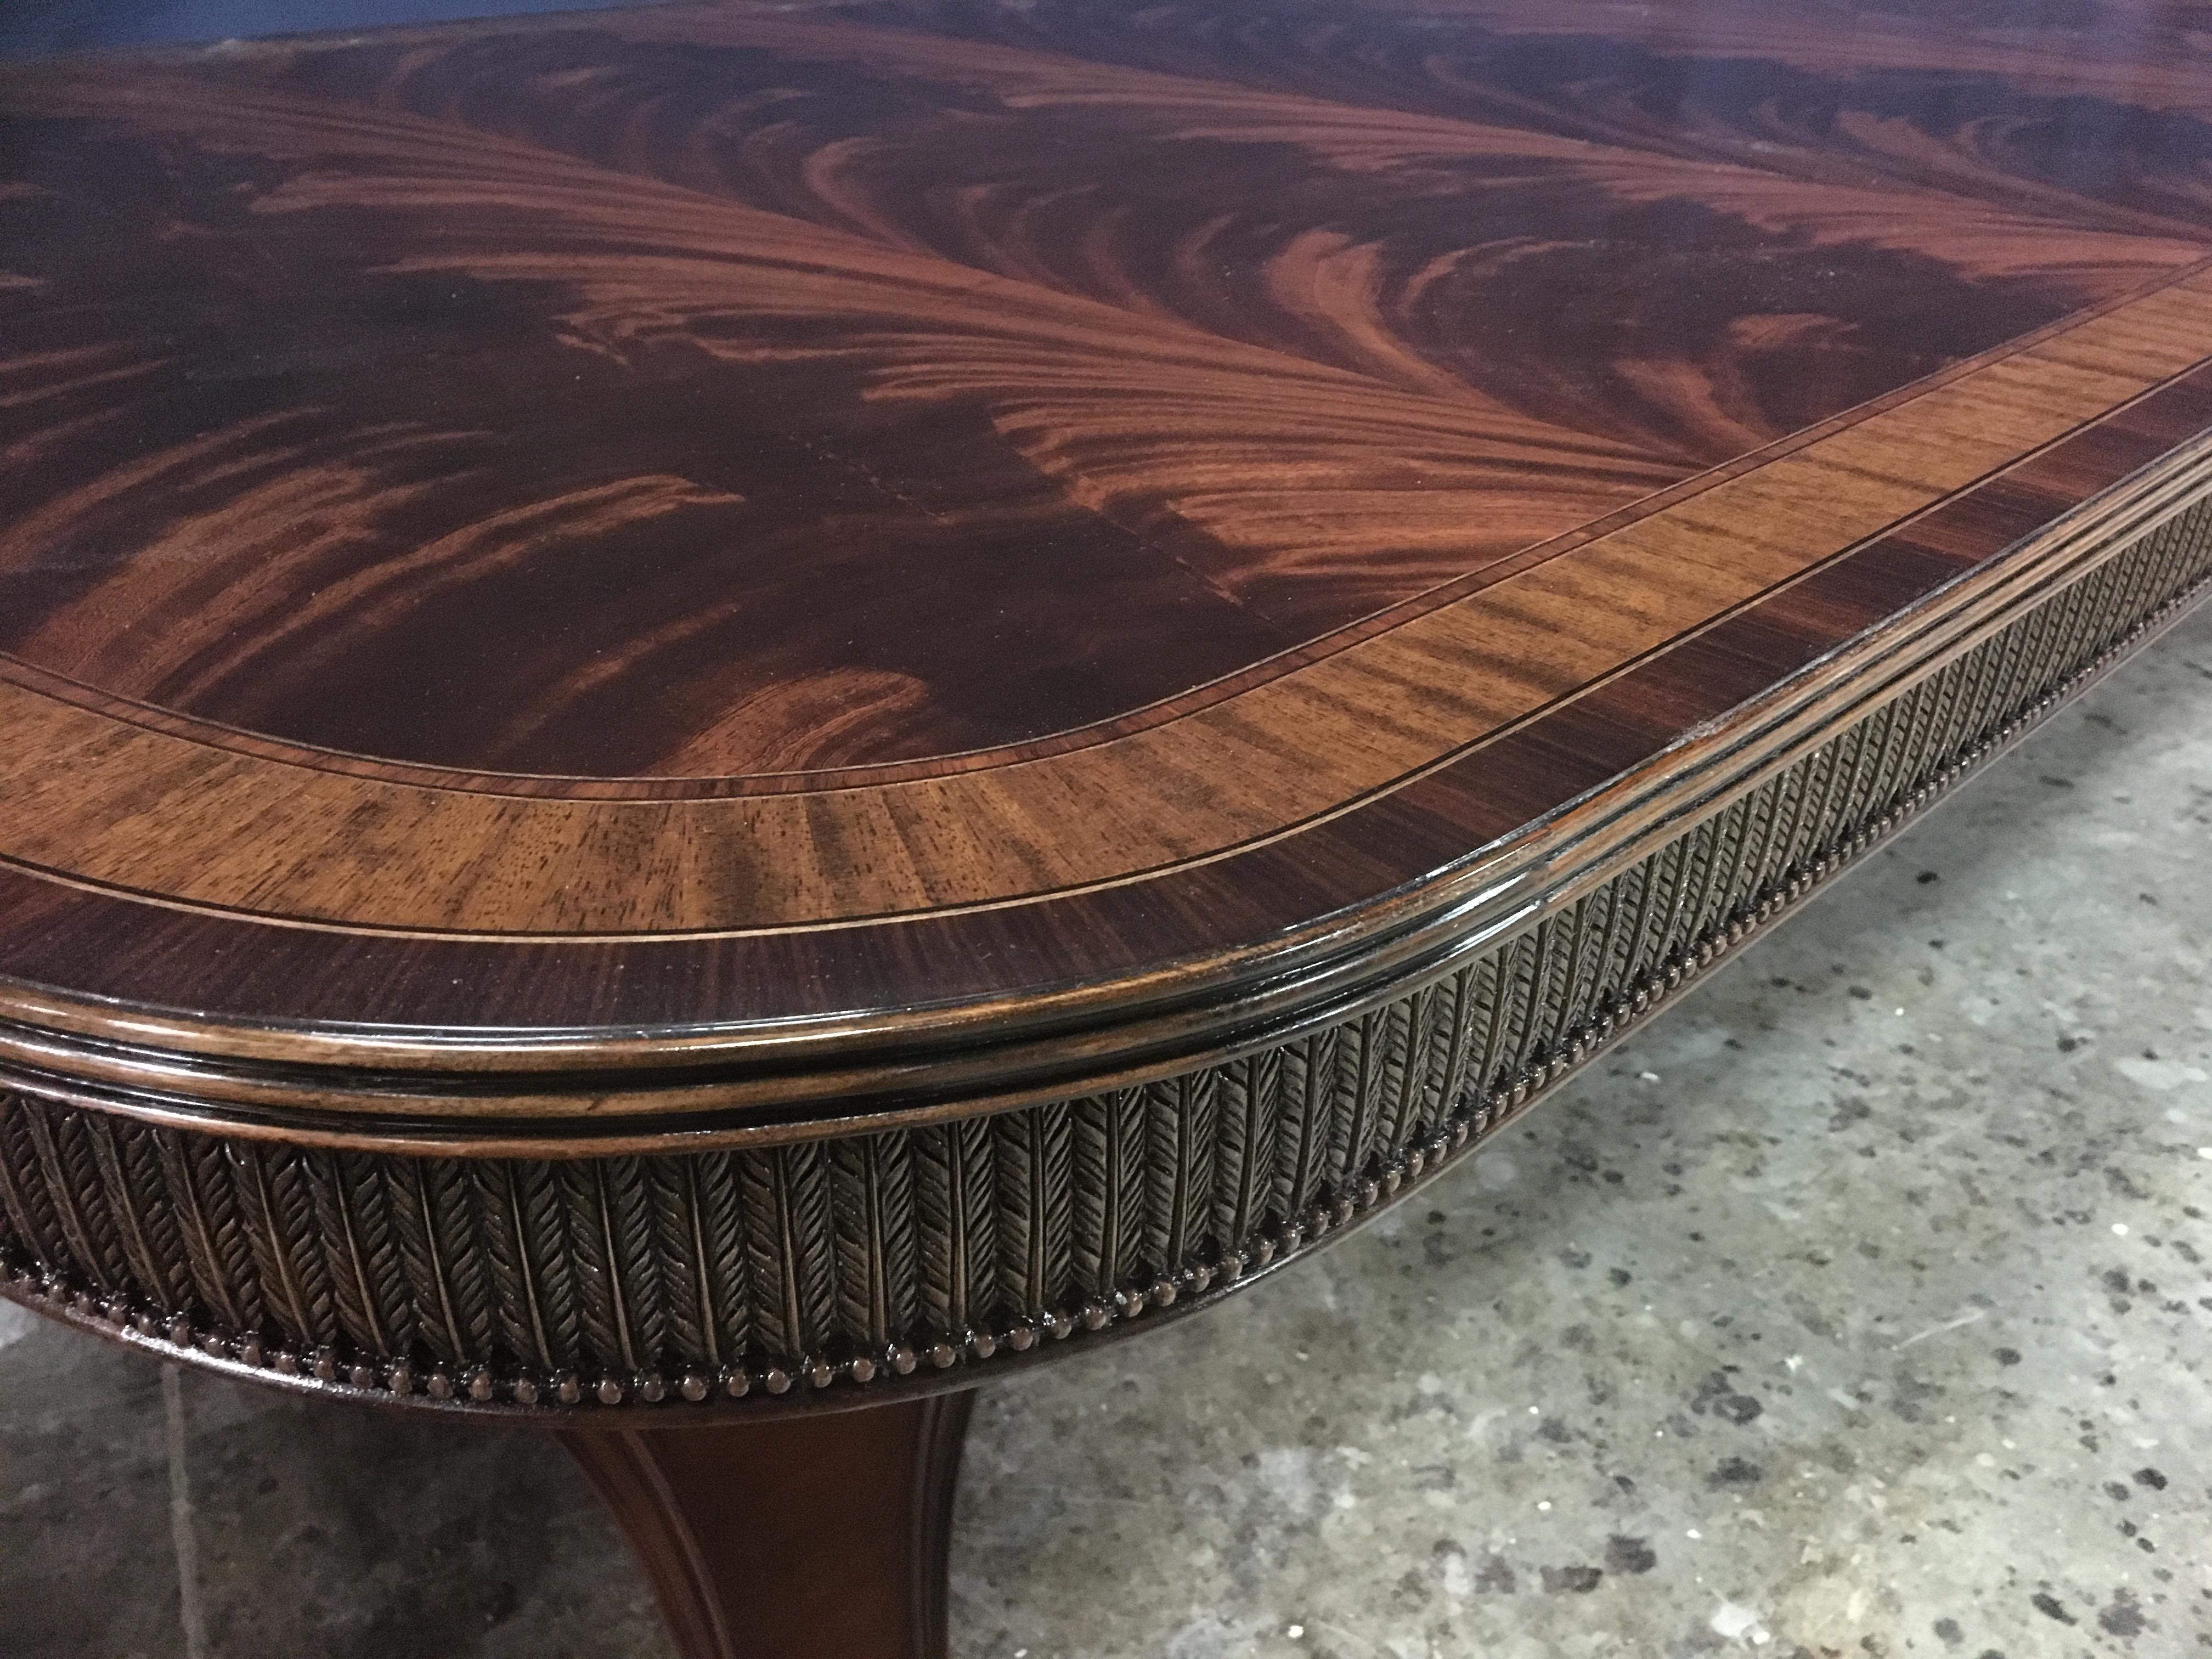 This is a made-to-order large traditional Regency style mahogany dining table made in the Leighton Hall shop. It features a field of slip-matched swirly crotch mahogany from West Africa and other exotic woods as borders.  The borders are separated